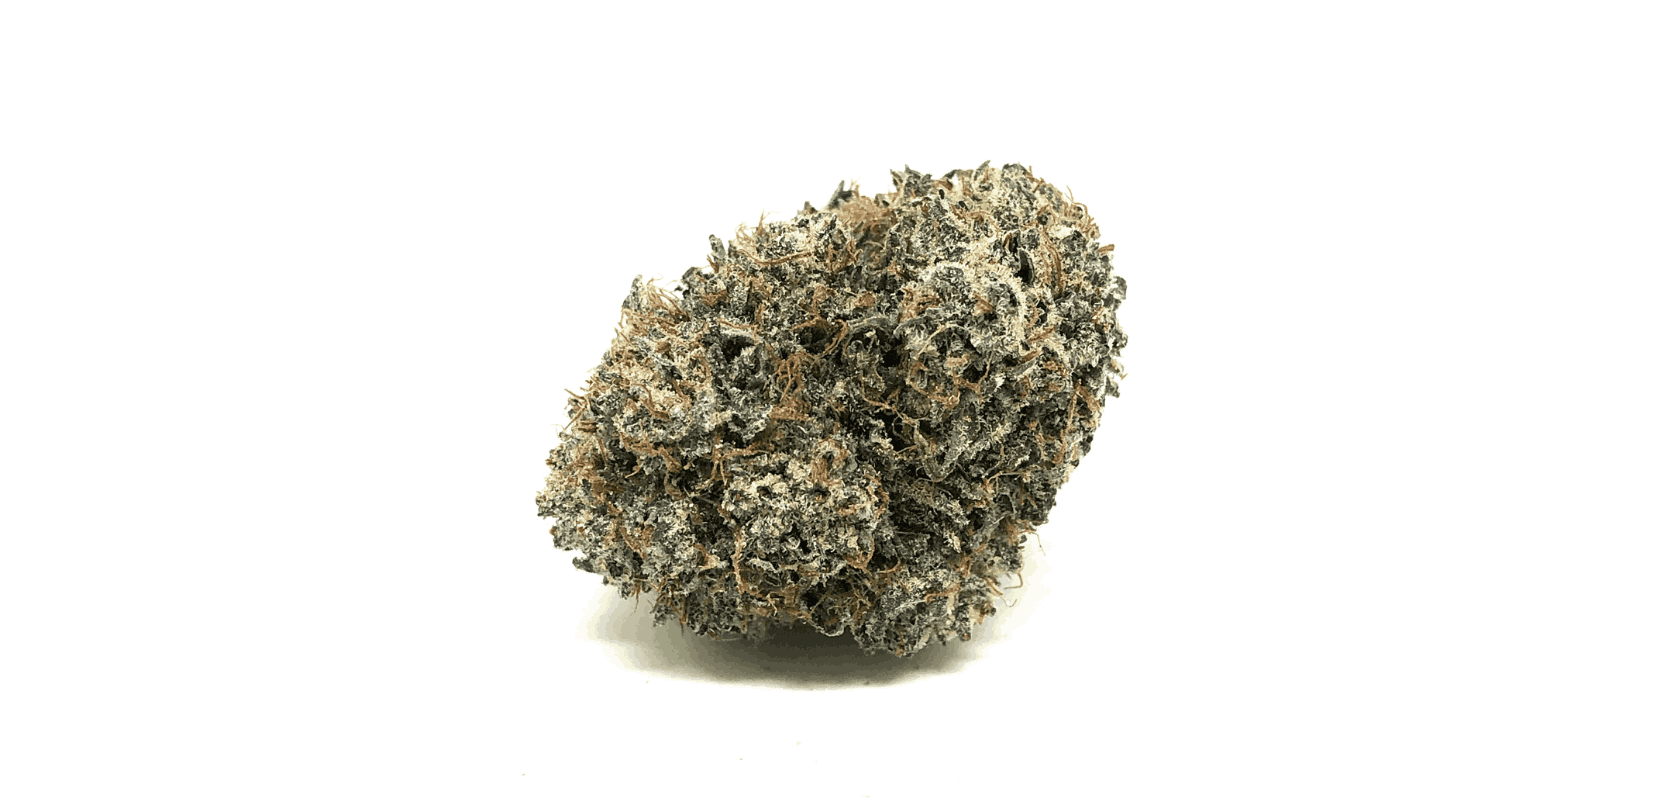 The Pink God strain is a mild Indica leaning hybrid (70:30 Indica to Sativa ratio) with around 23 to 25 percent of THC. 